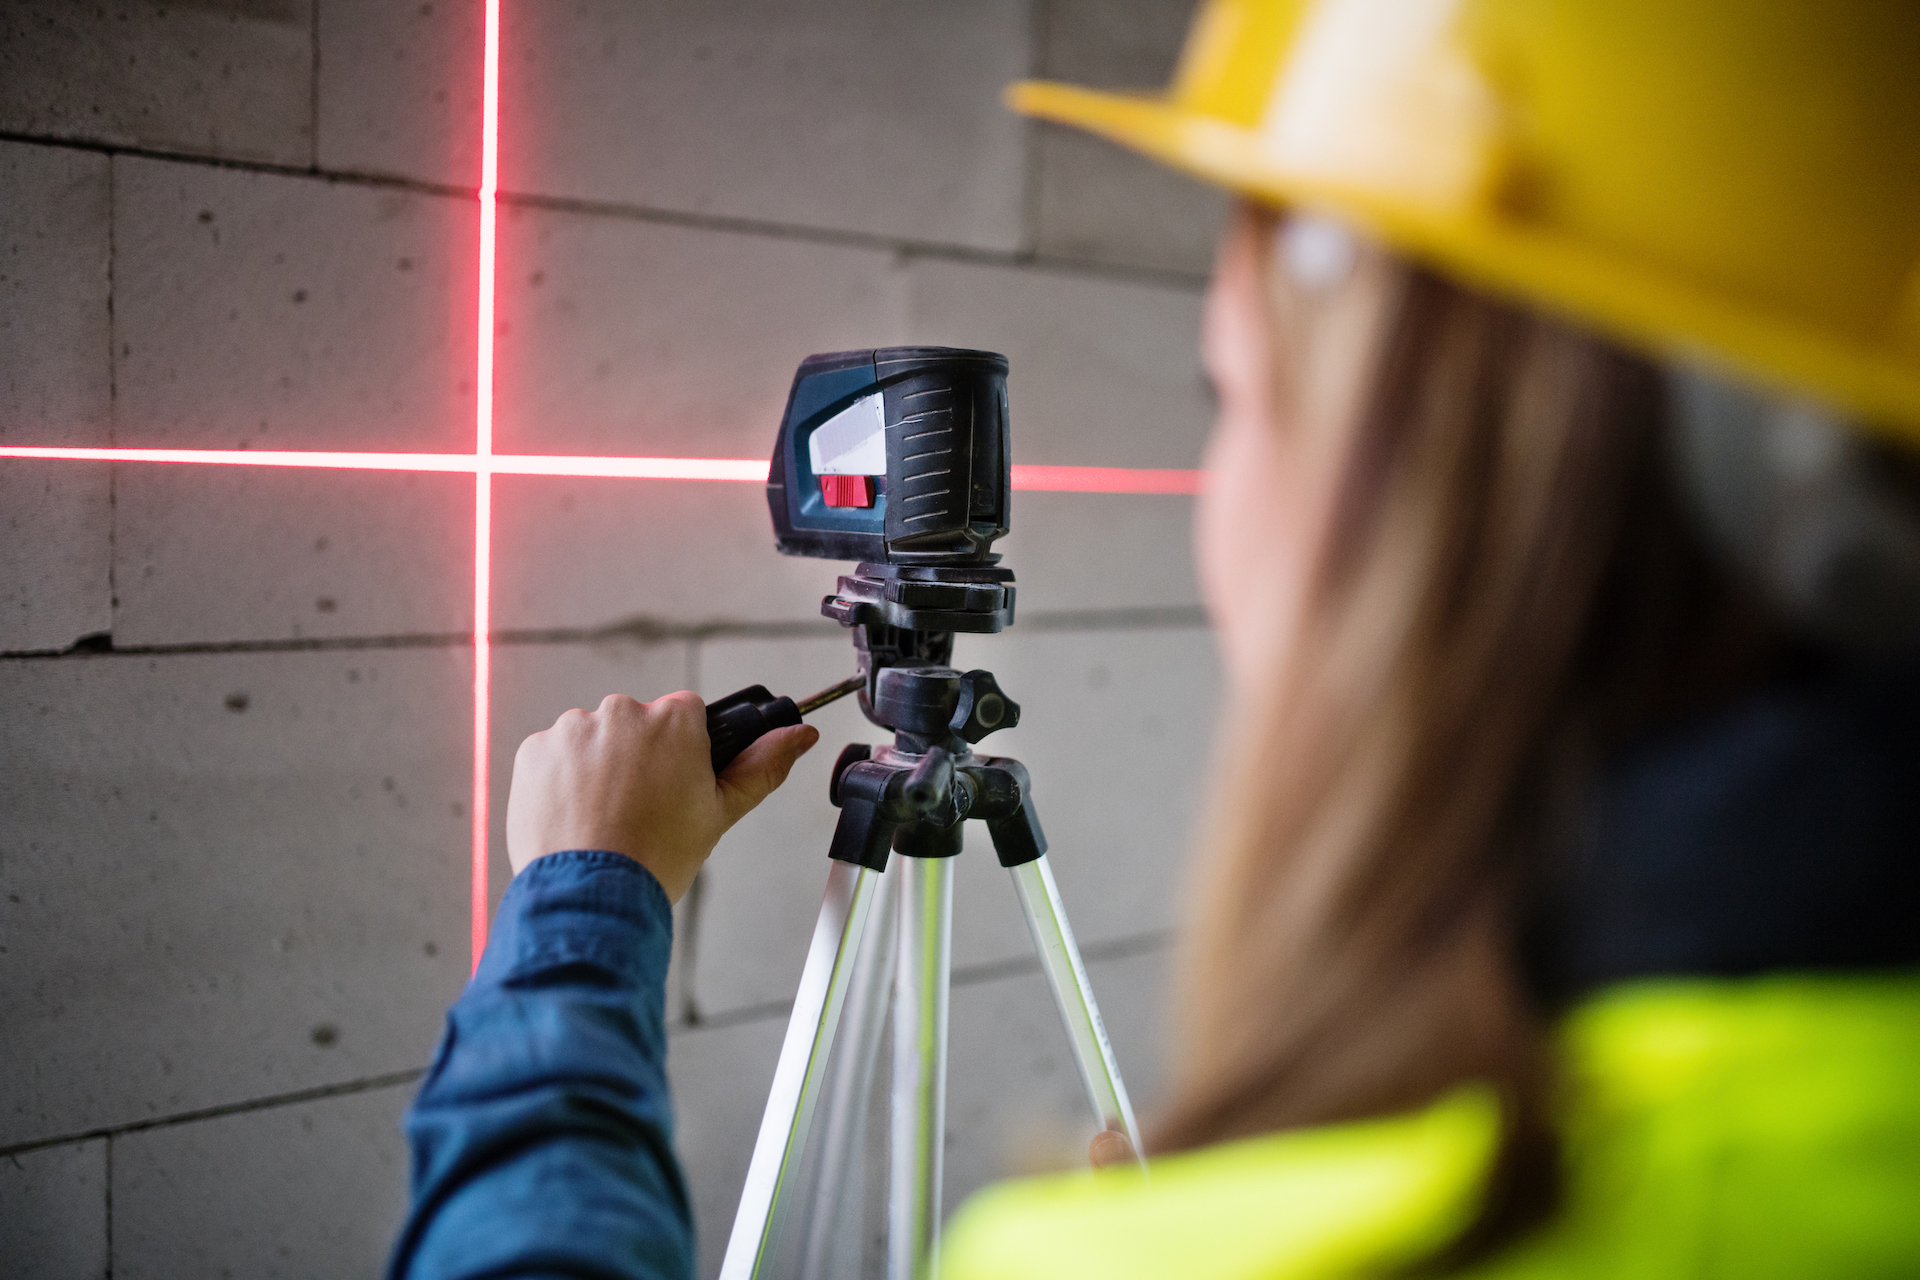 How Are Laser Levels Used in Surveying and Construction?